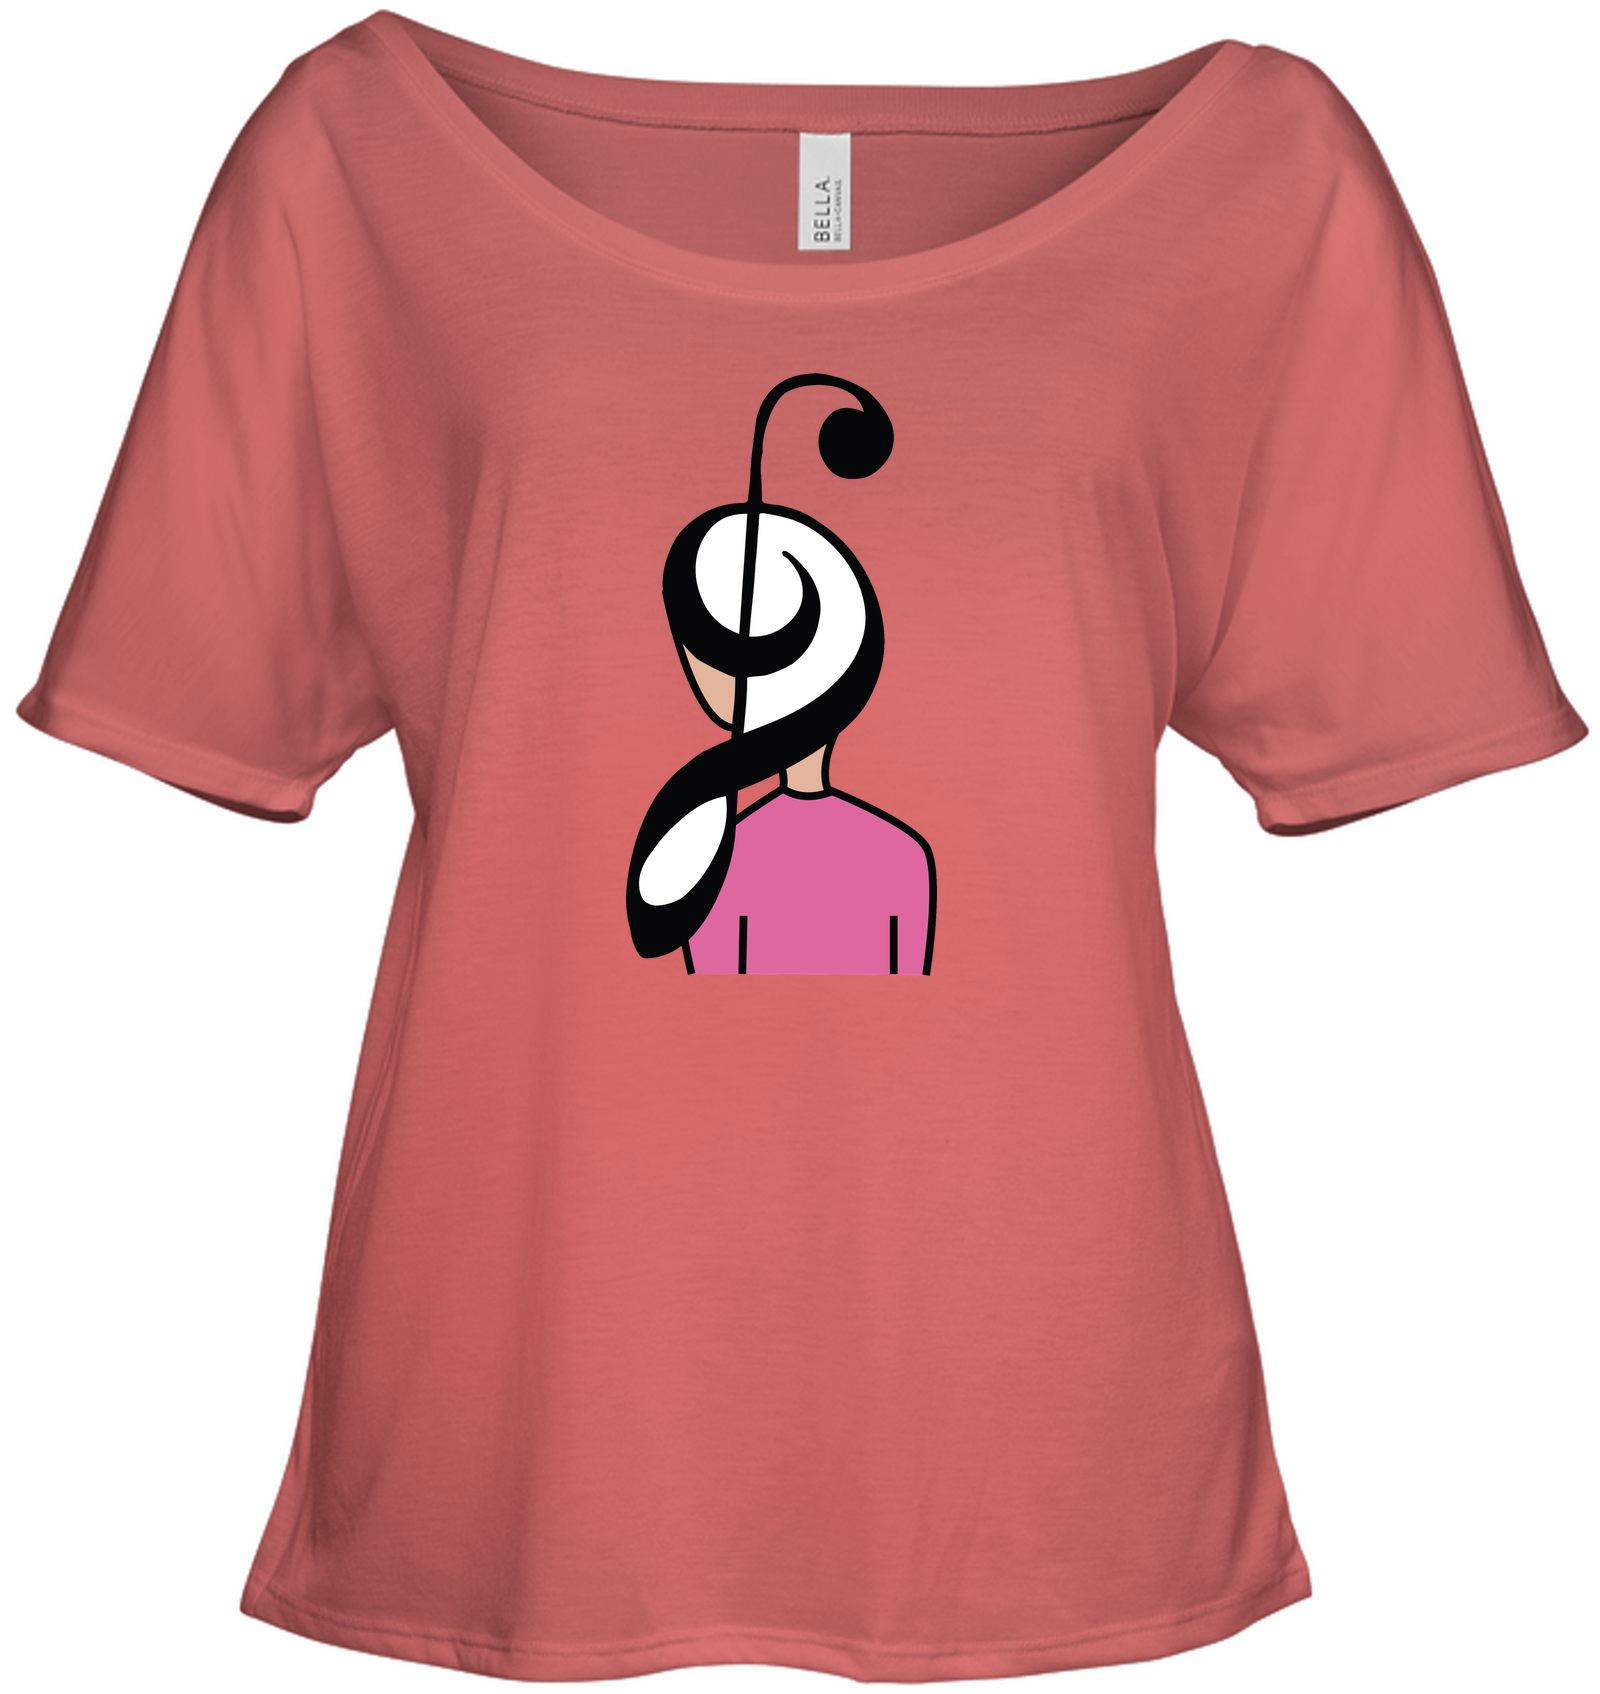 Musical Hairstyle - Bella + Canvas Women's Slouchy Tee